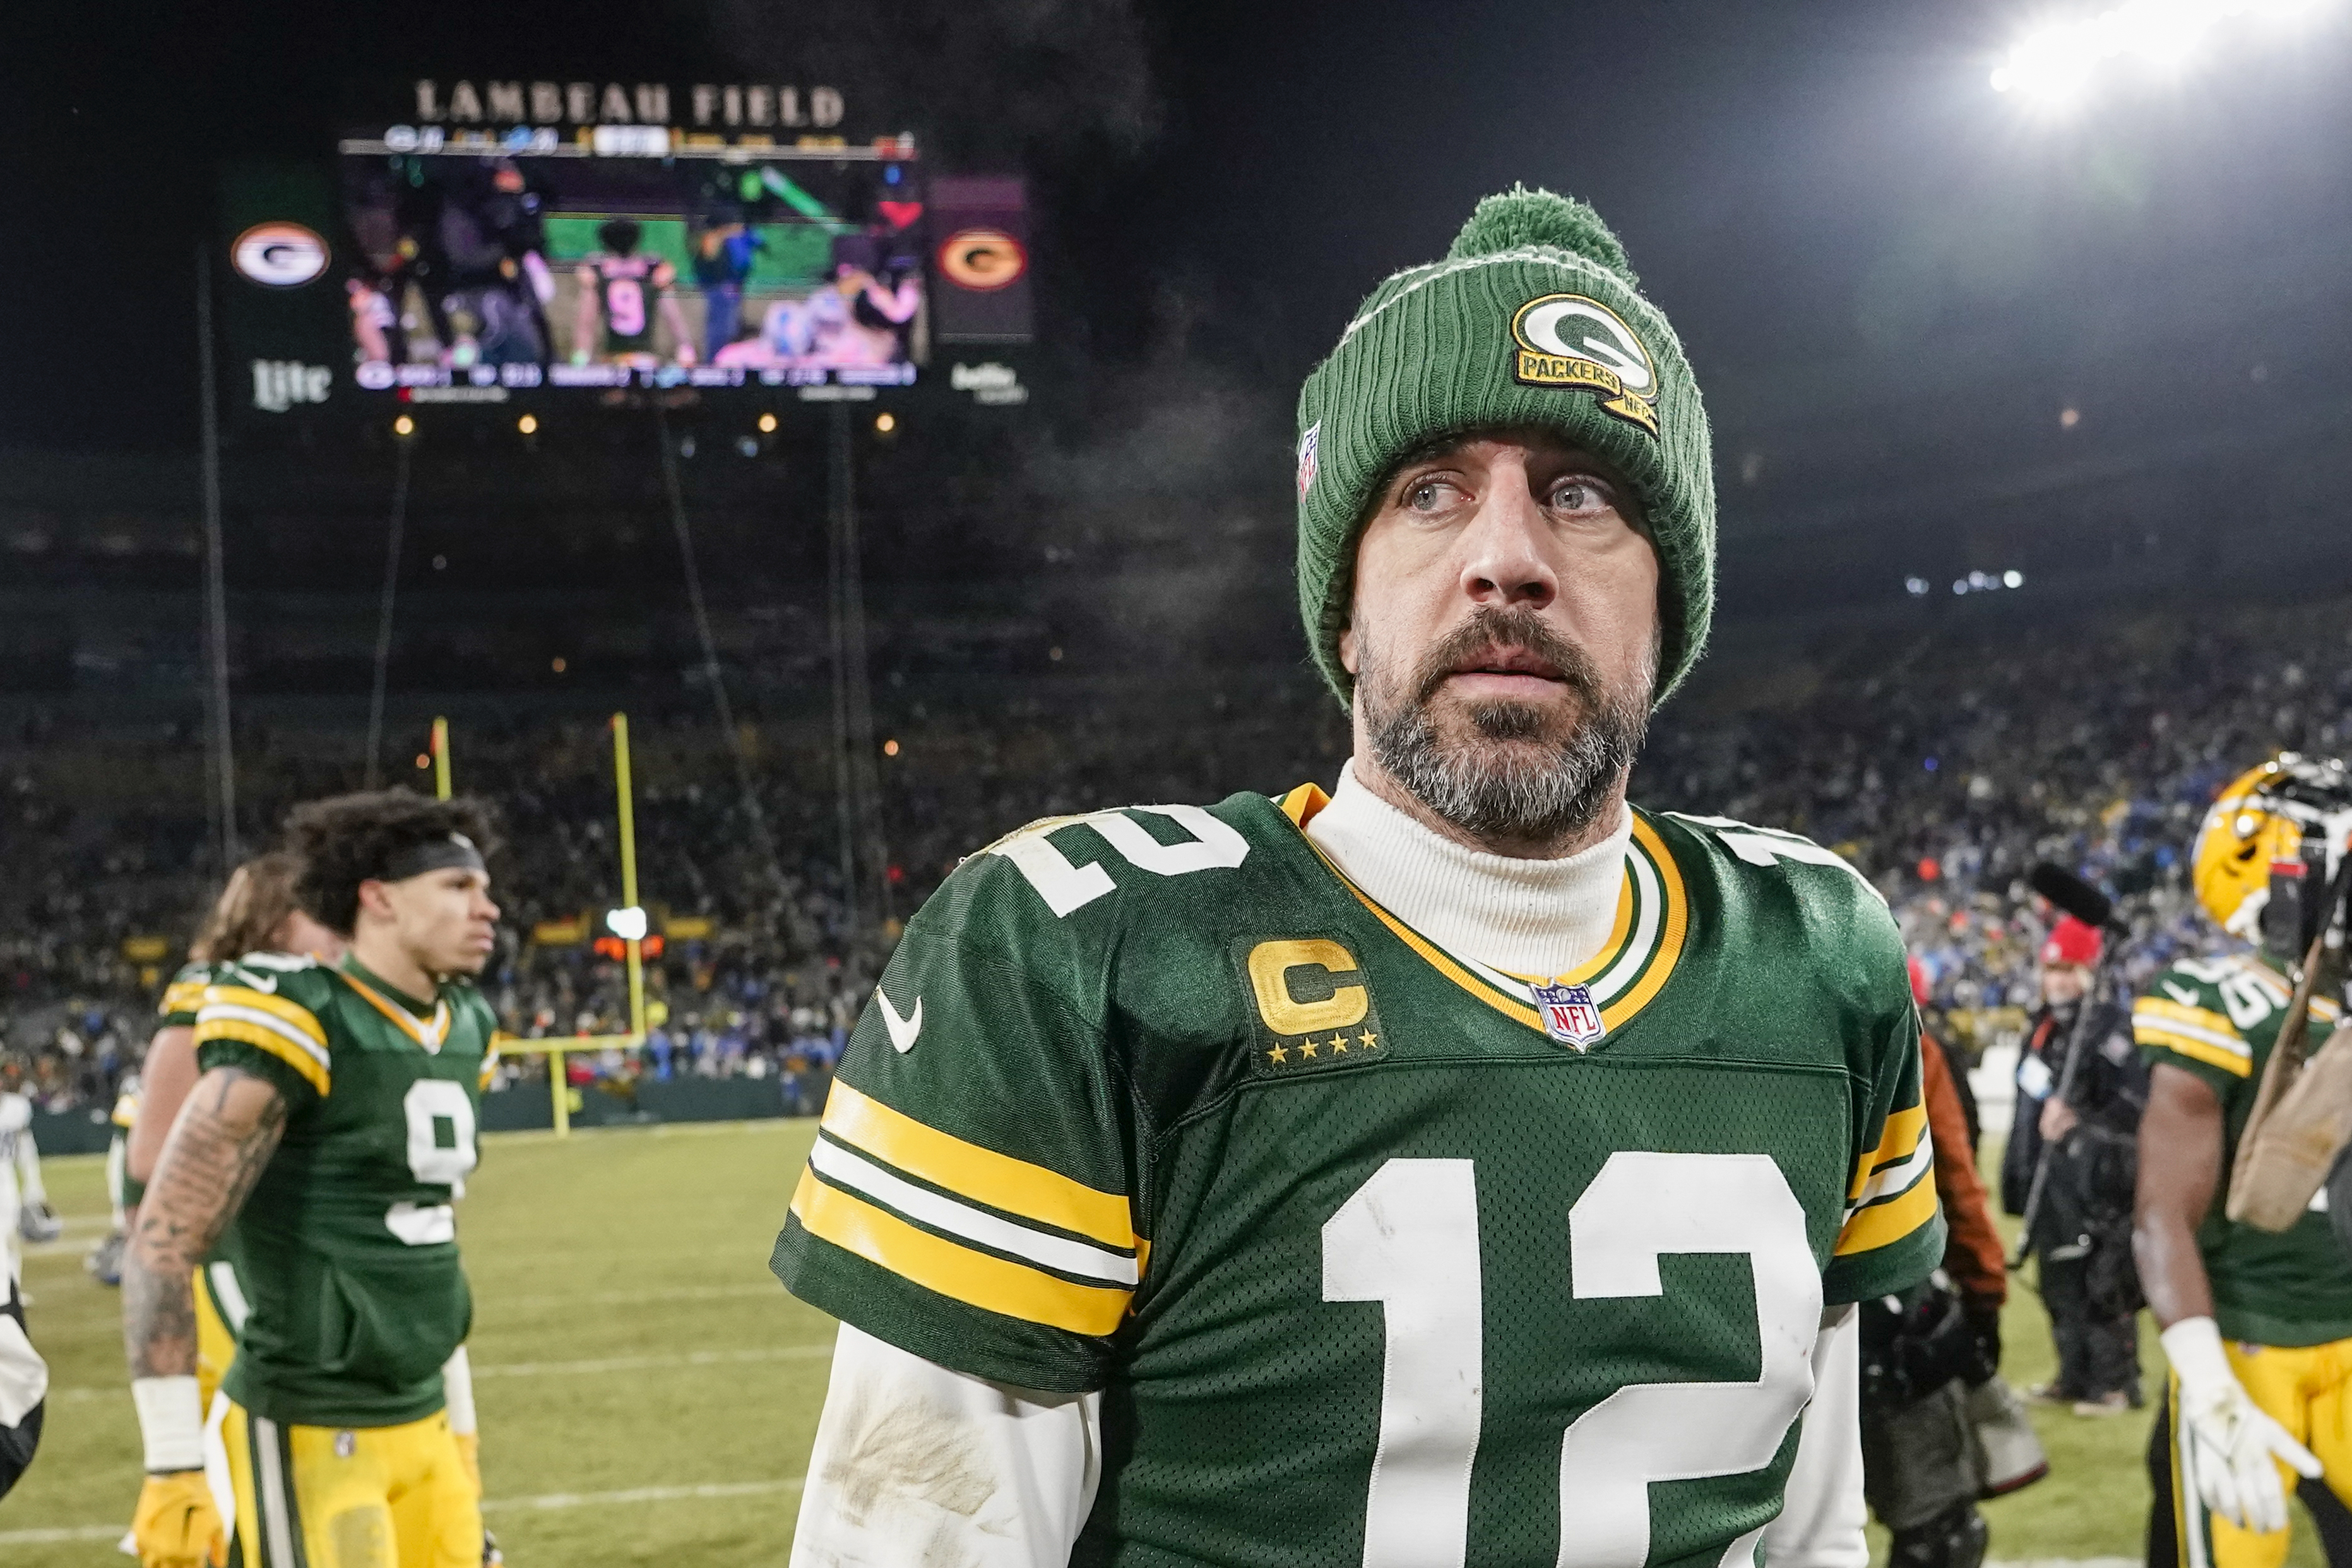 Hey, Aaron Rodgers: Welcome to New Jersey! Please pack some thick